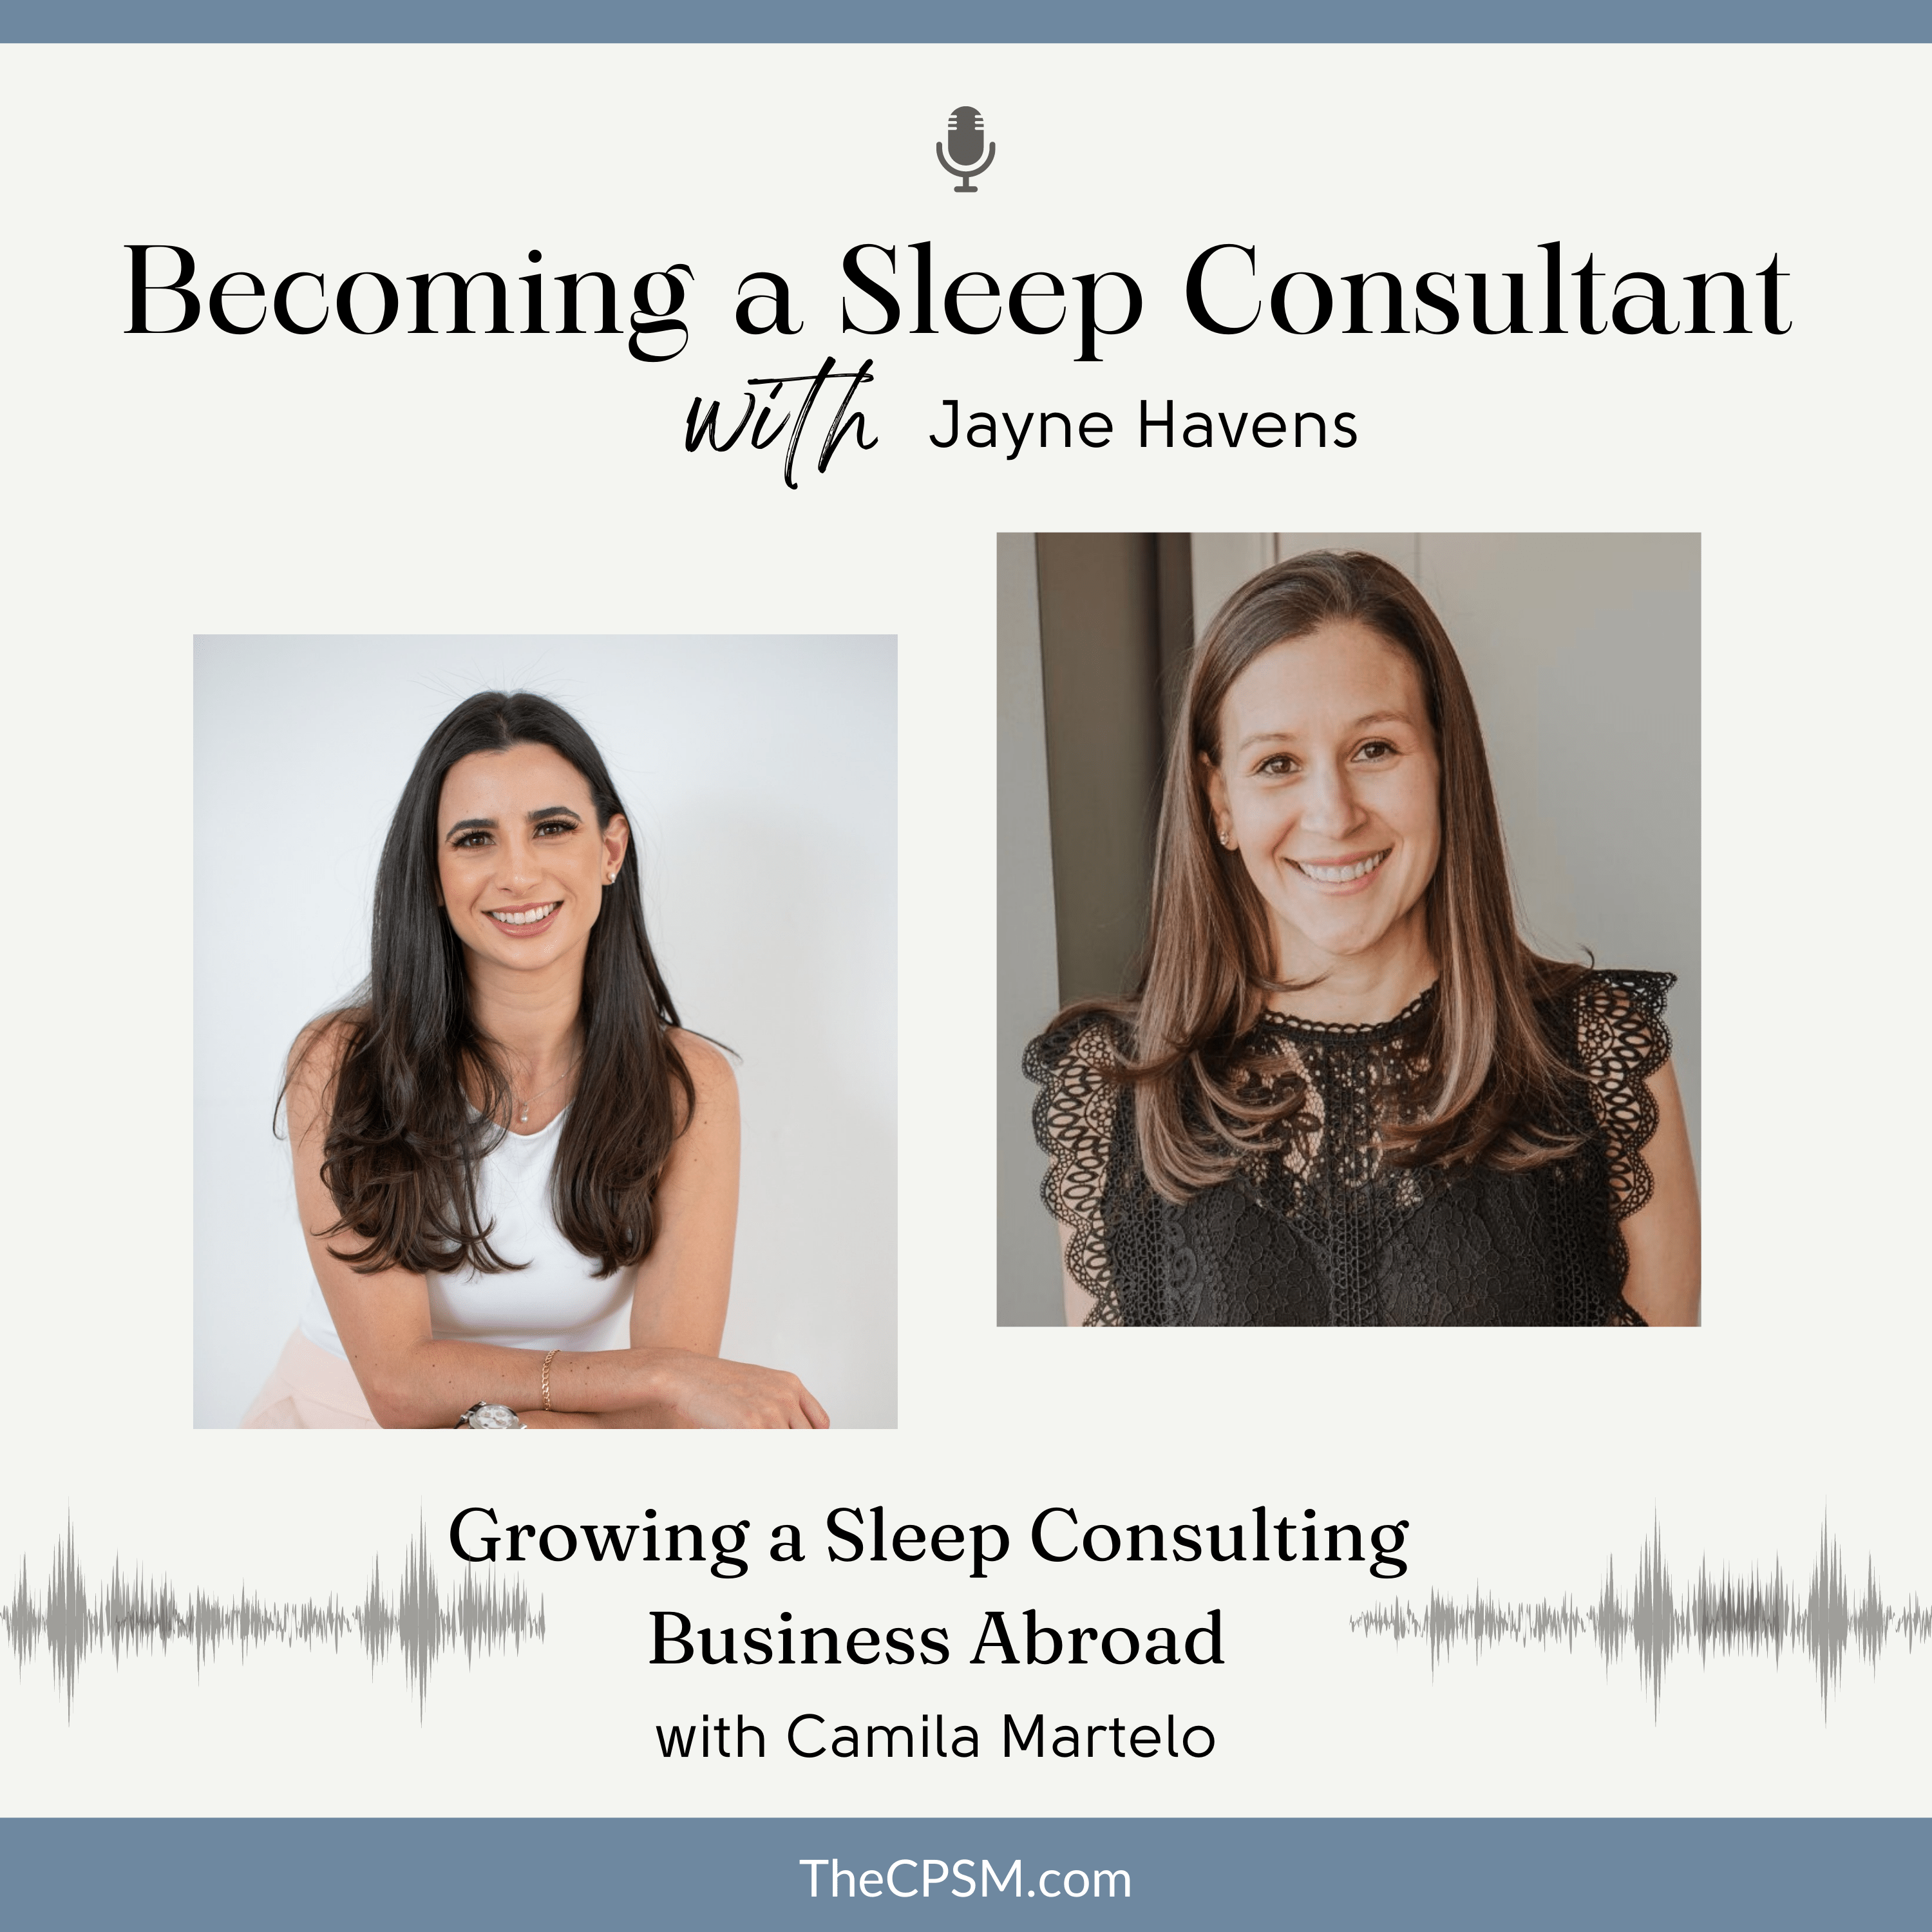 Growing a Sleep Consulting Business Abroad with Camila Martelo